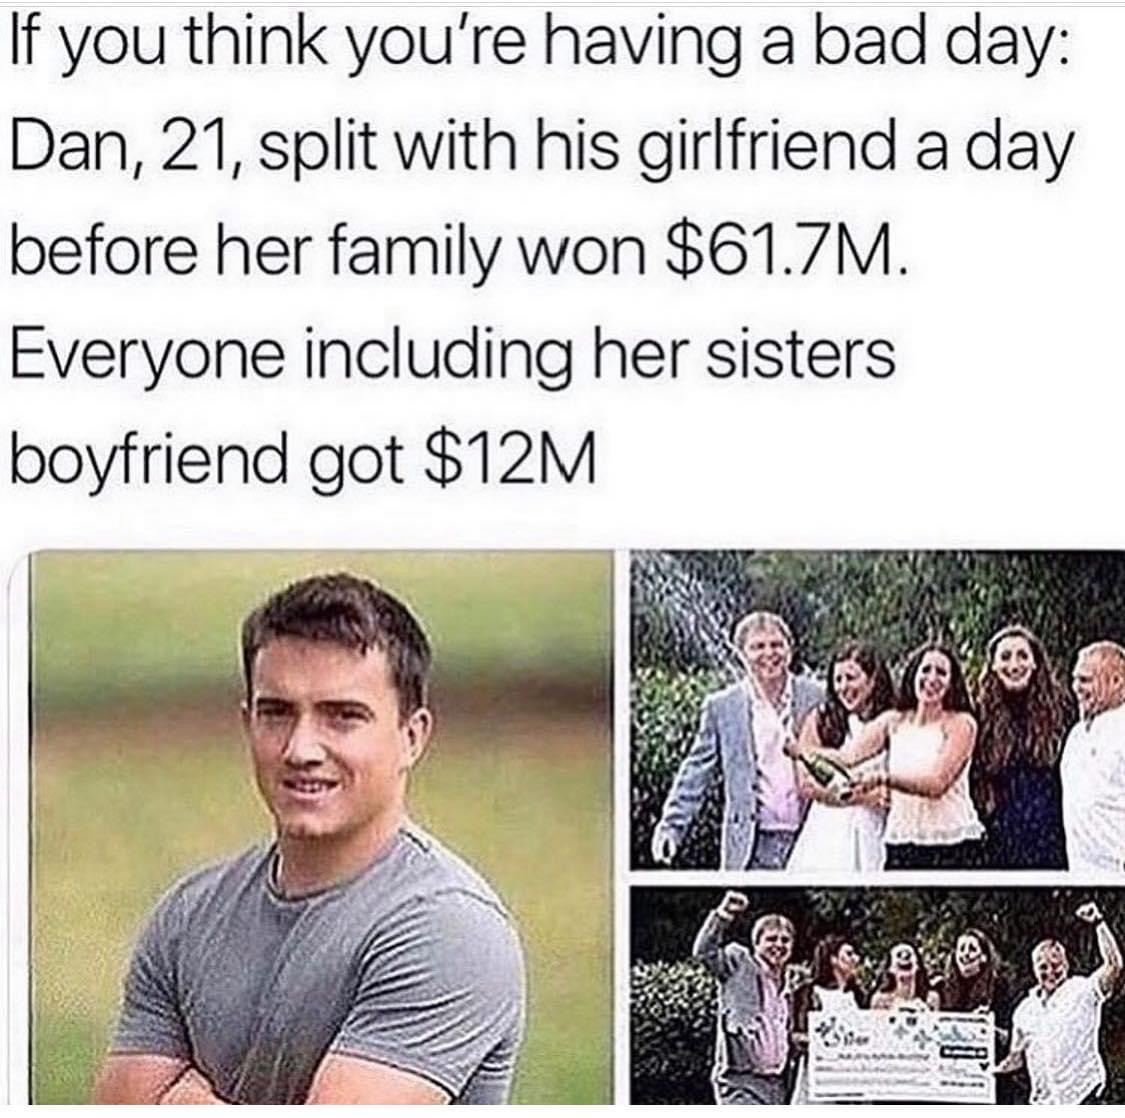 tasteless gentlemen memes - If you think you're having a bad day Dan, 21, split with his girlfriend a day before her family won $61.7M. Everyone including her sisters boyfriend got $12M